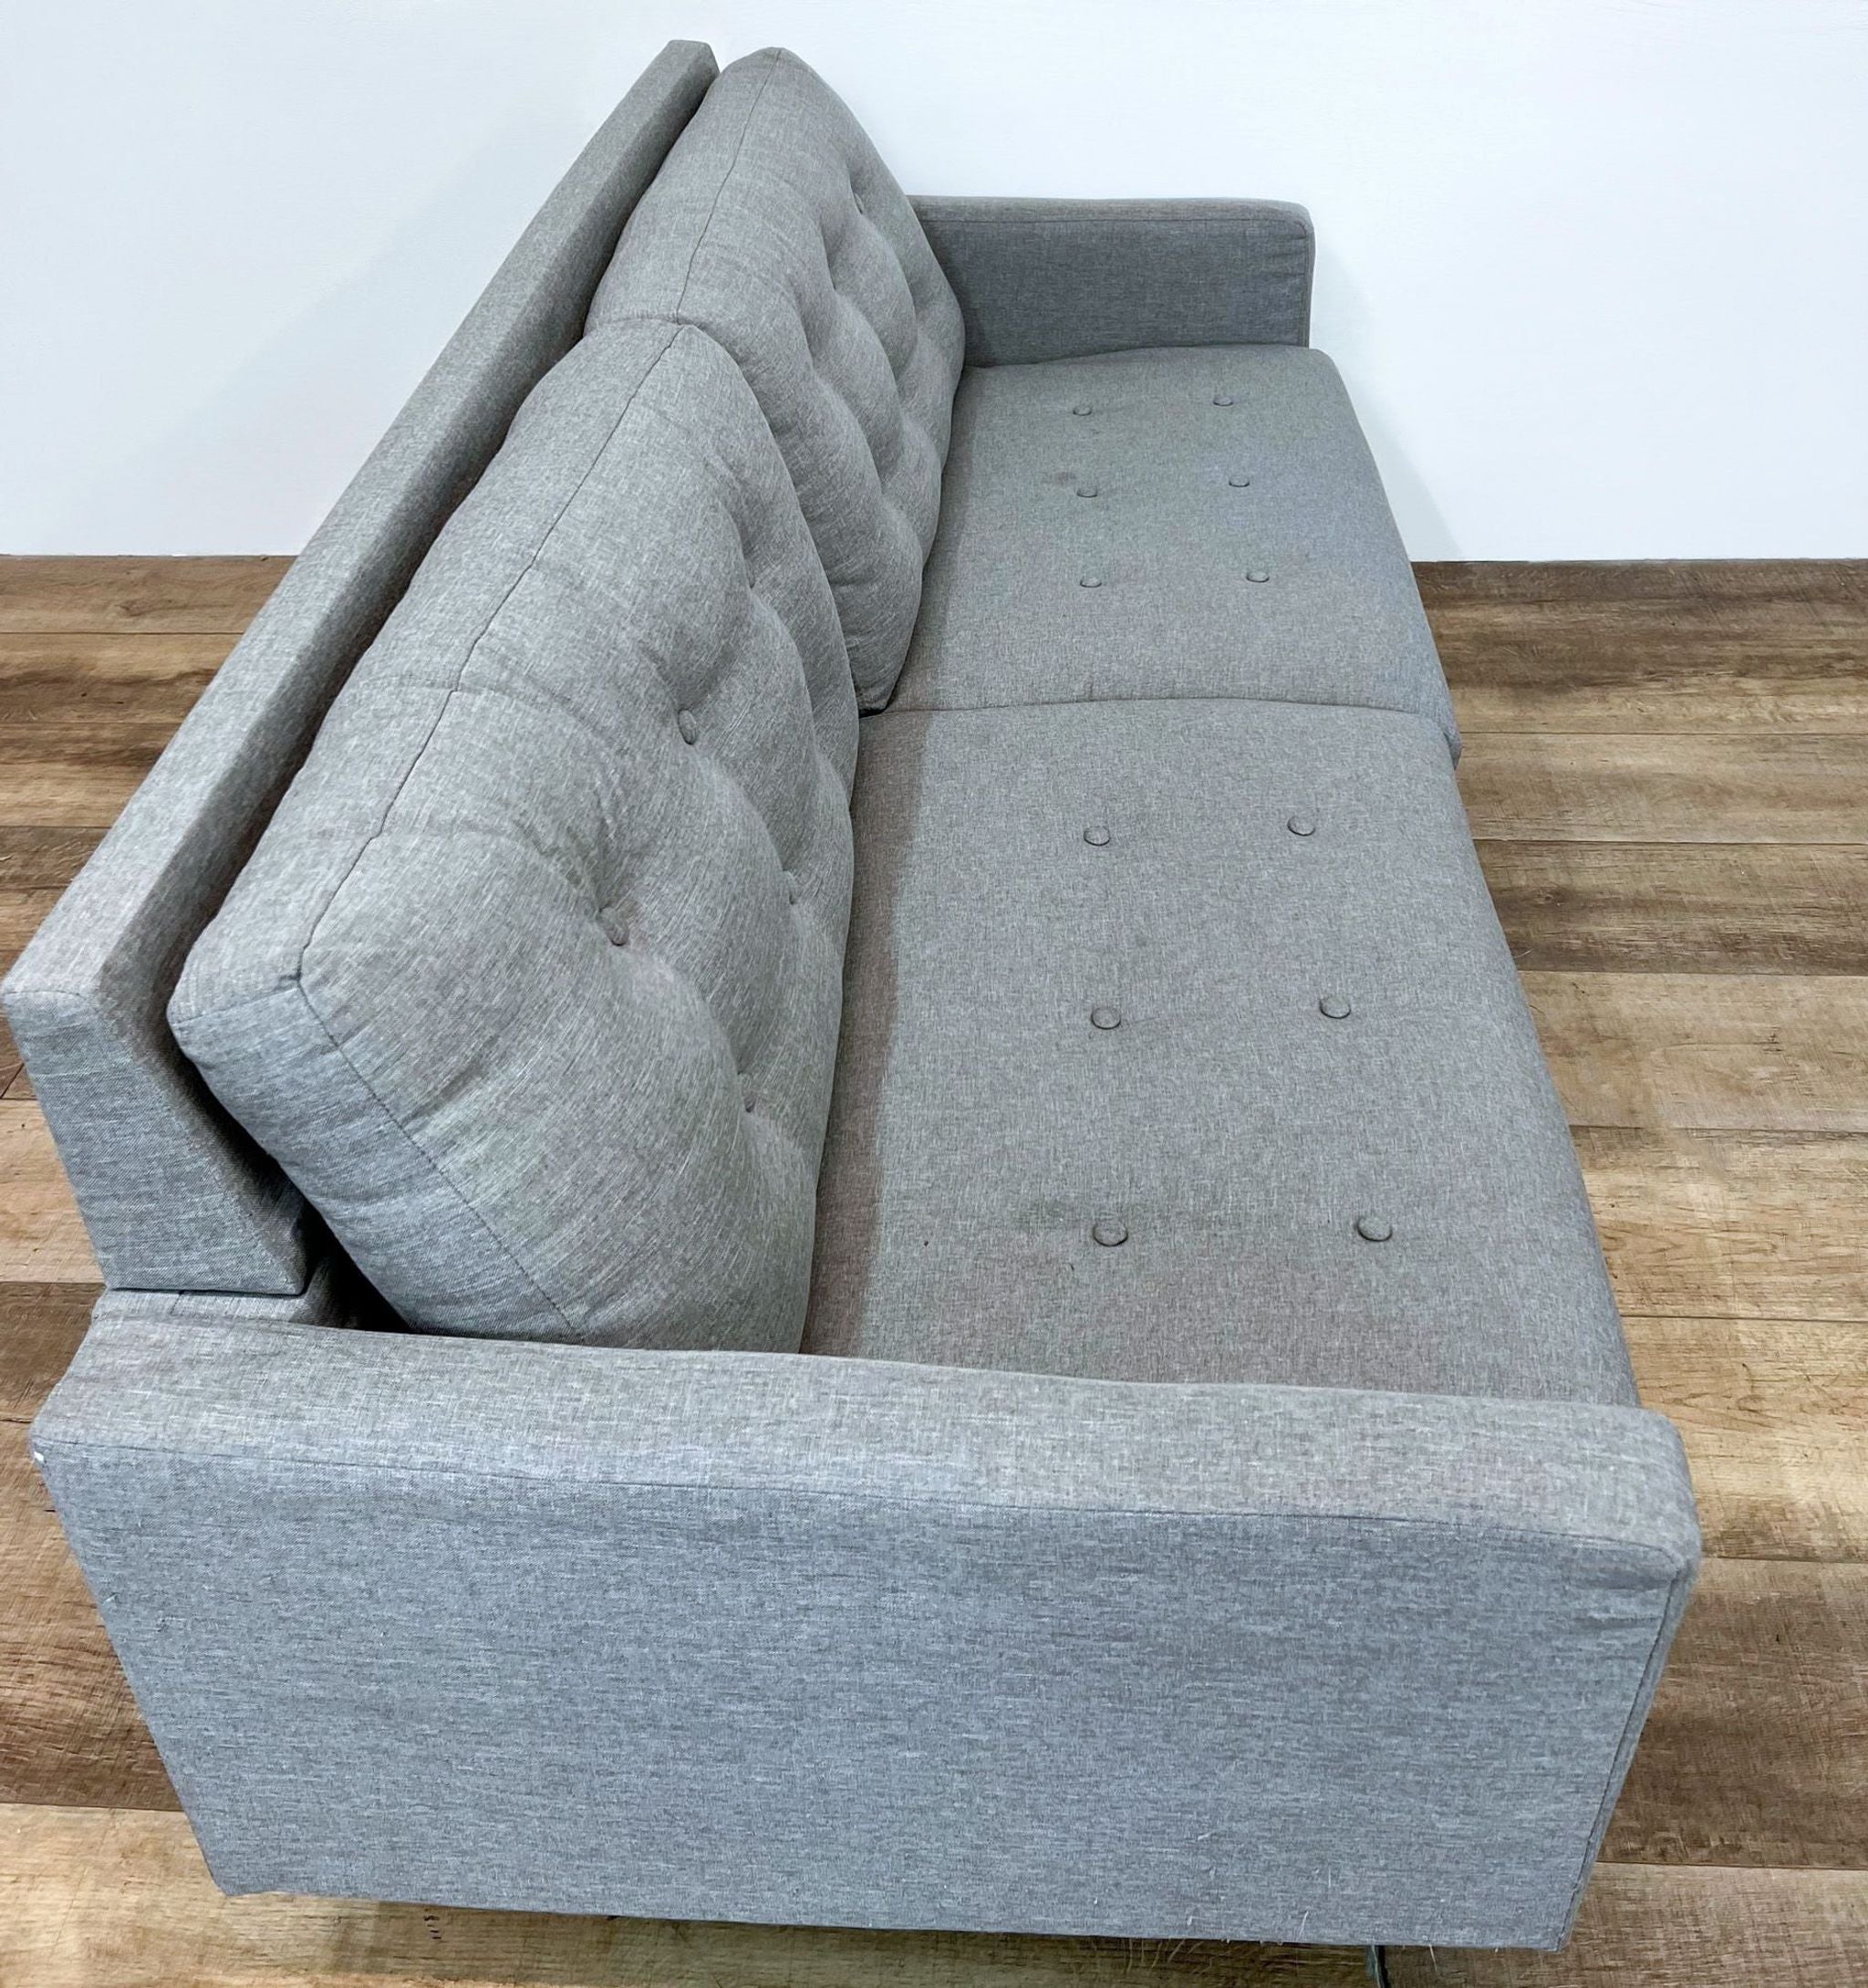 Gray Aeon Furniture 3-seat compact sofa with tufted backrest and tapered feet on wooden floor.